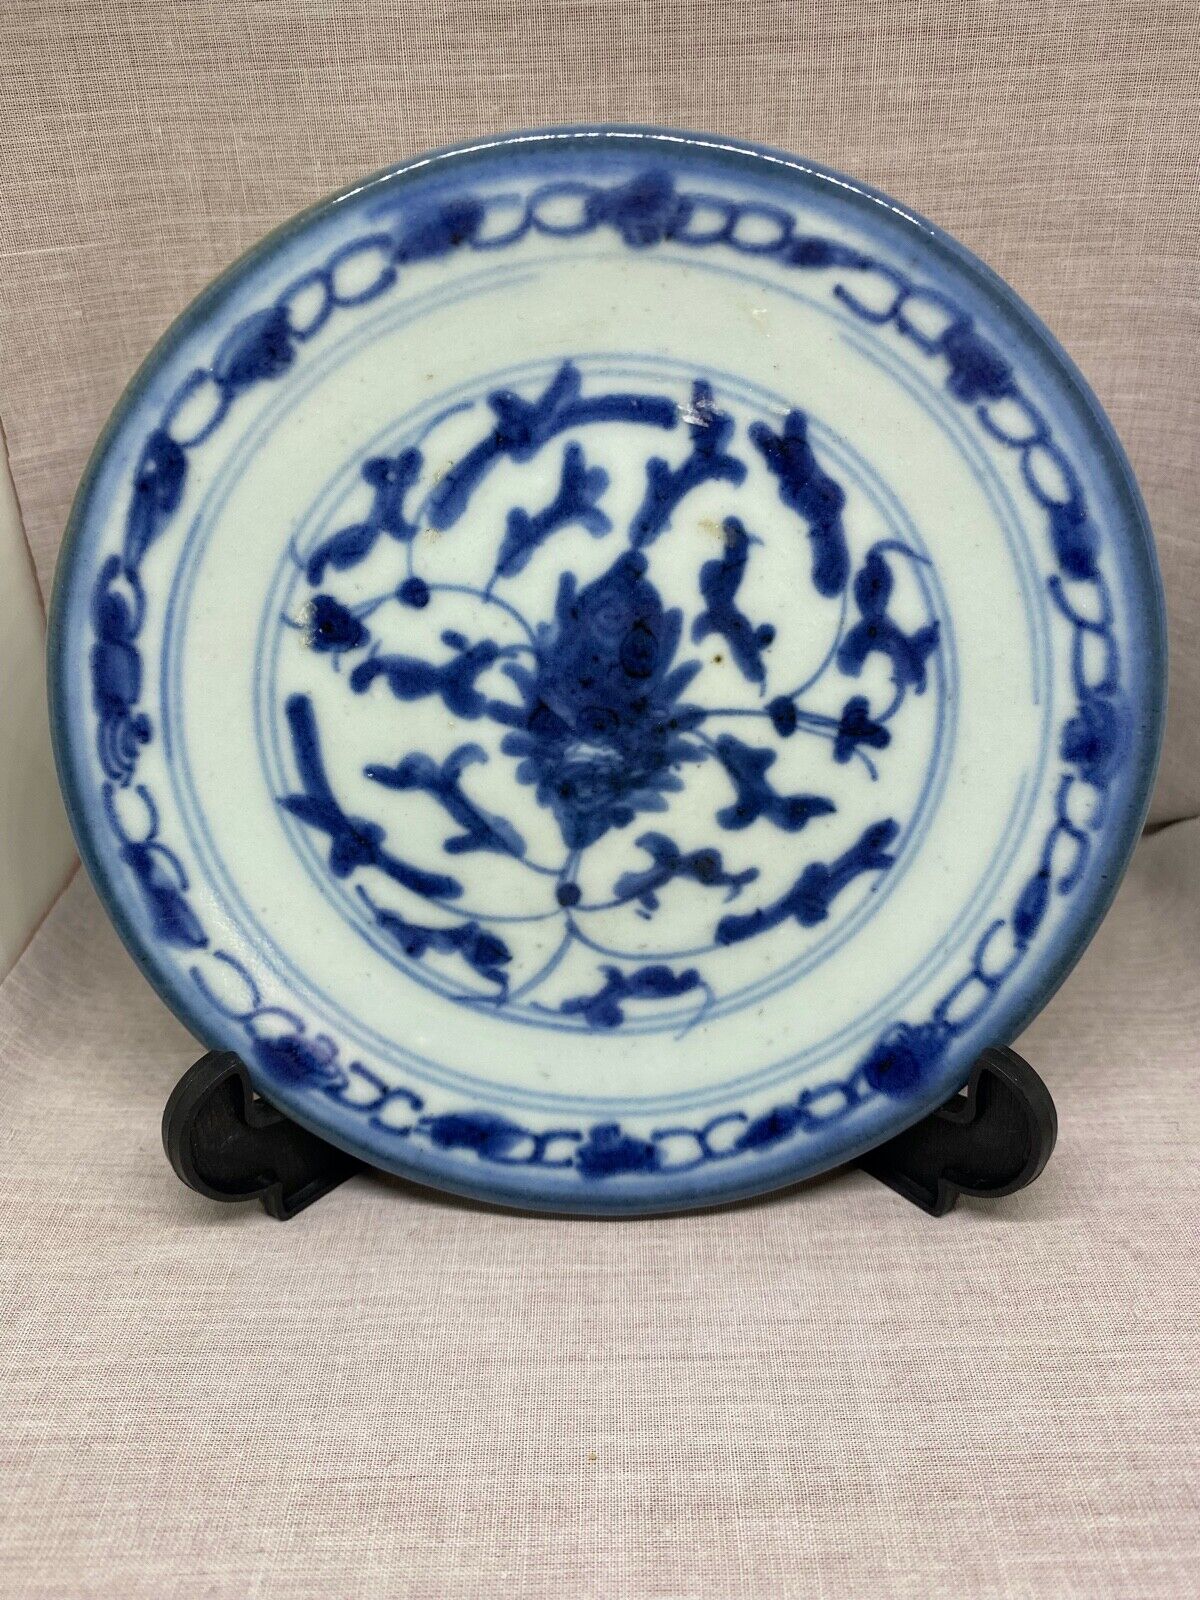 A Superb c18th. Century Chinese Hand Painted Porcelain Plate in Blue & Tin White